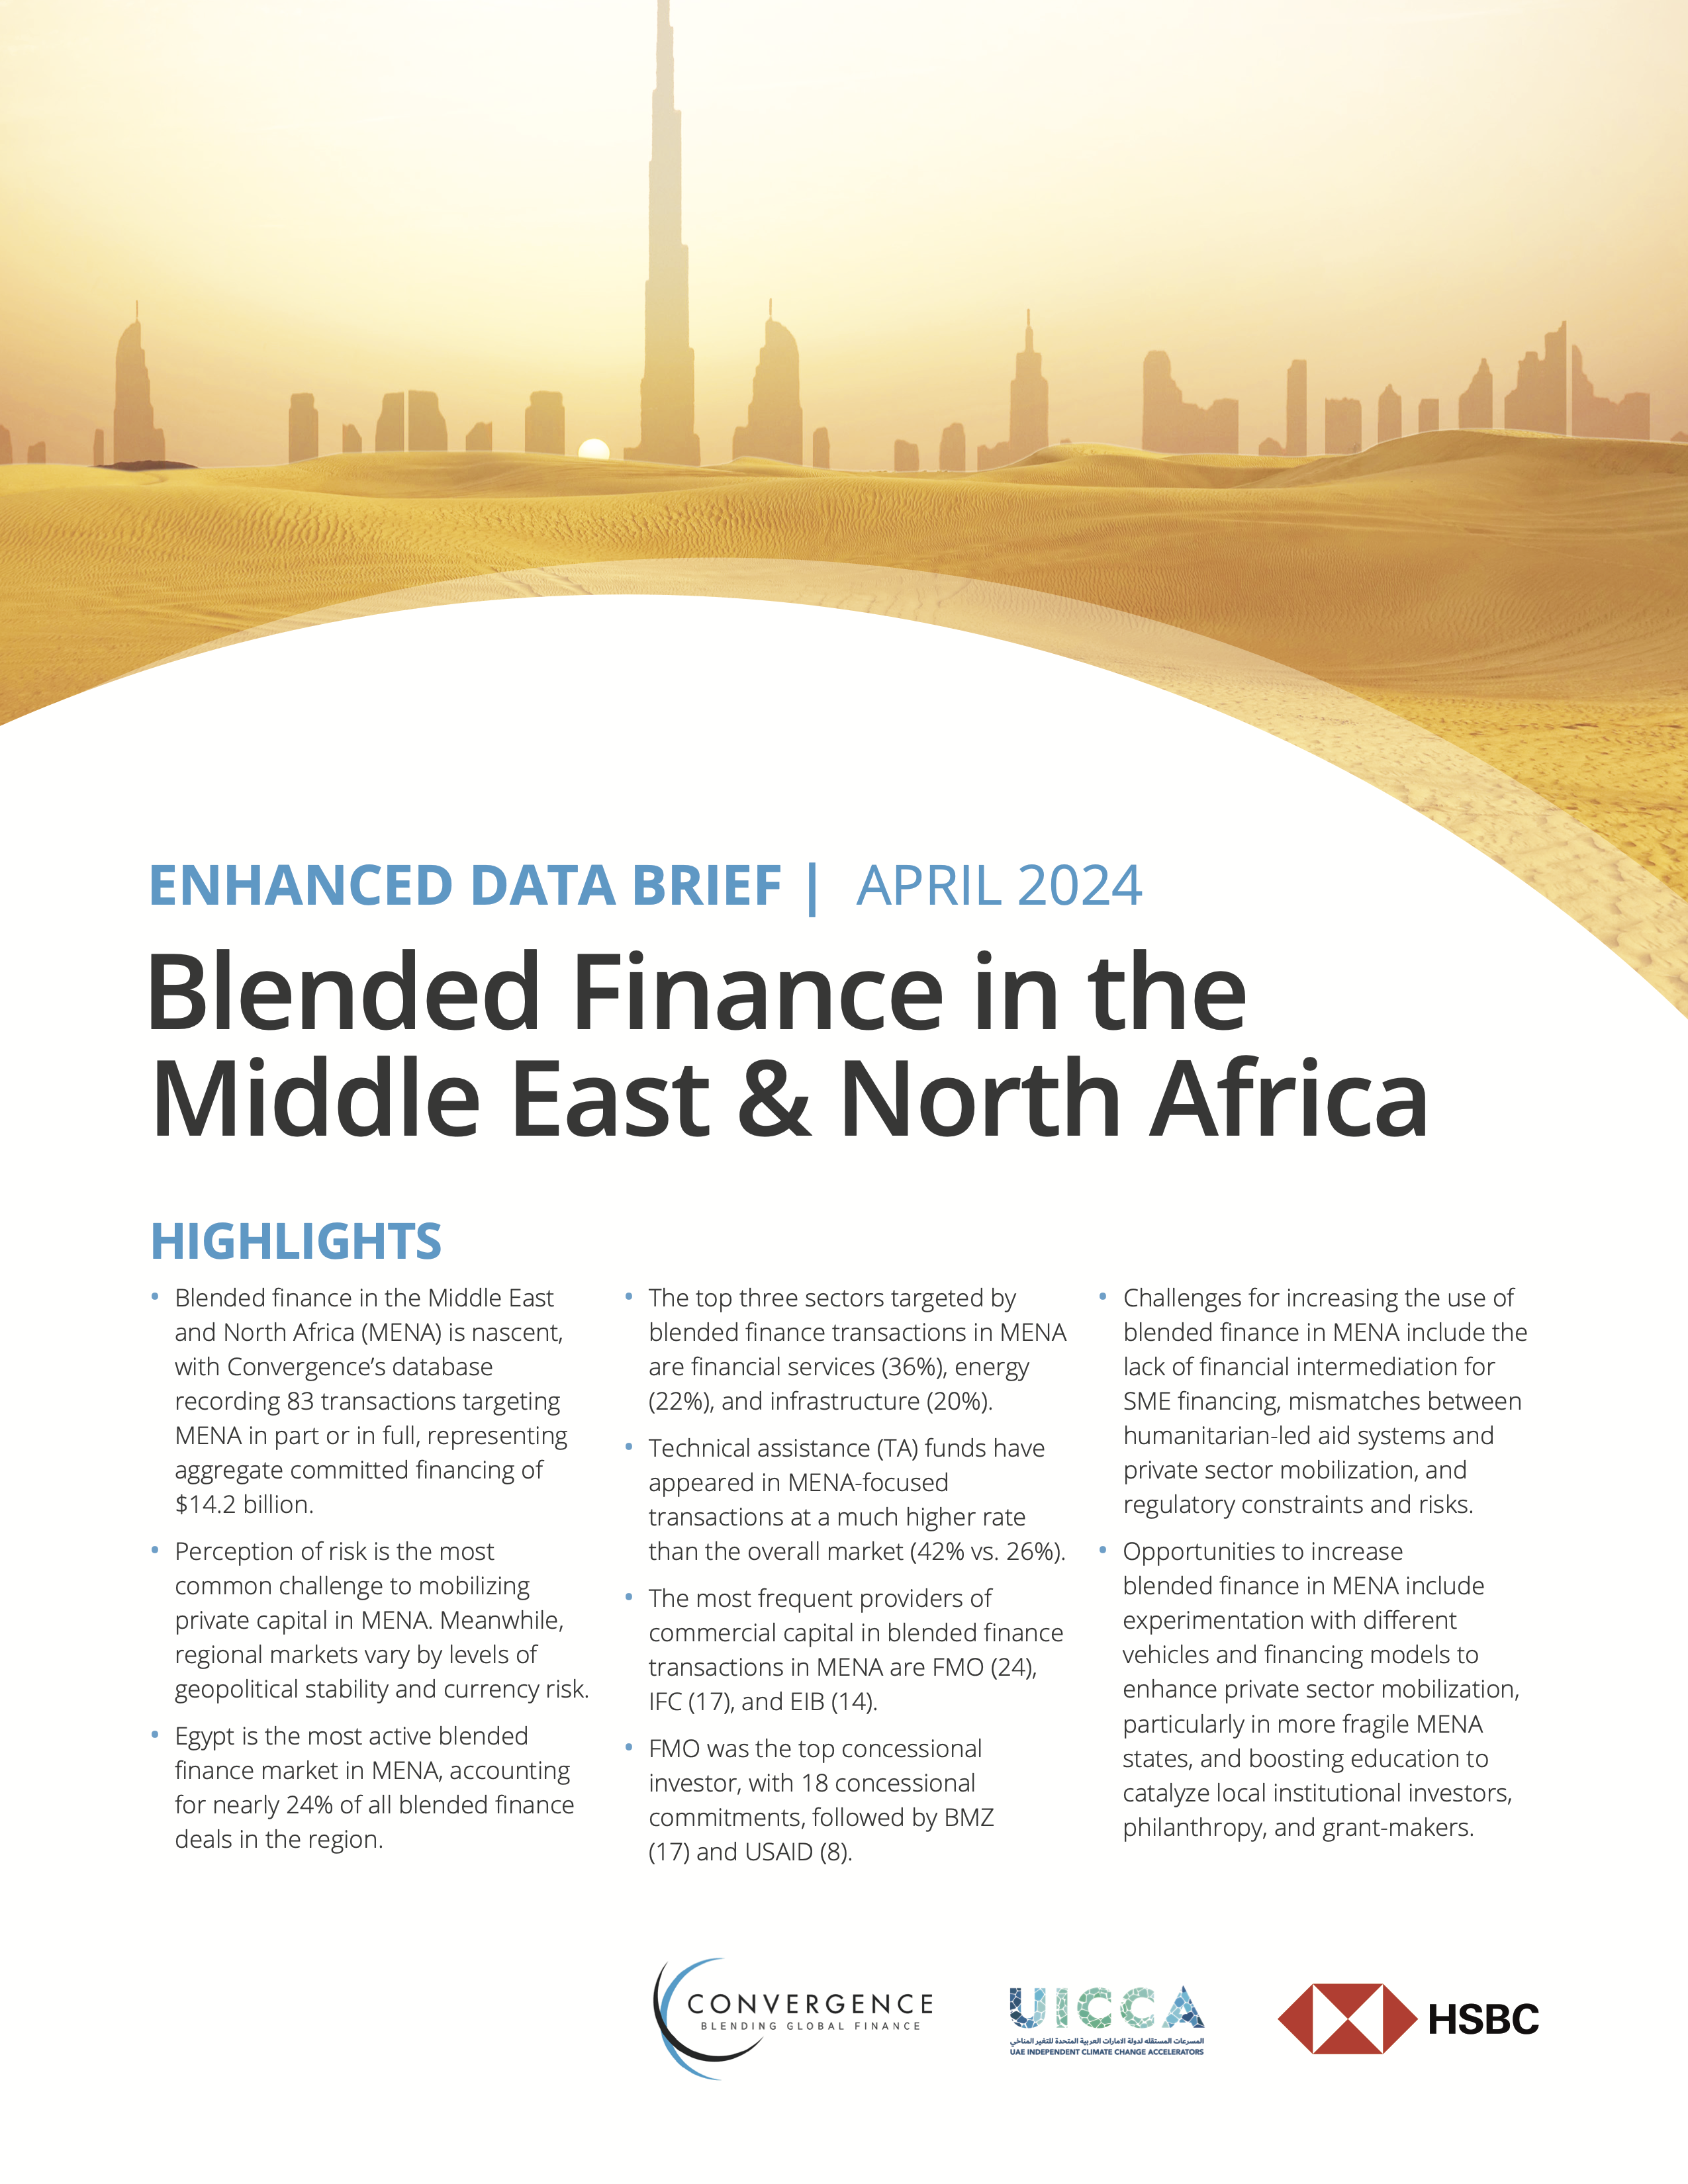 Blended Finance in the Middle East & North Africa